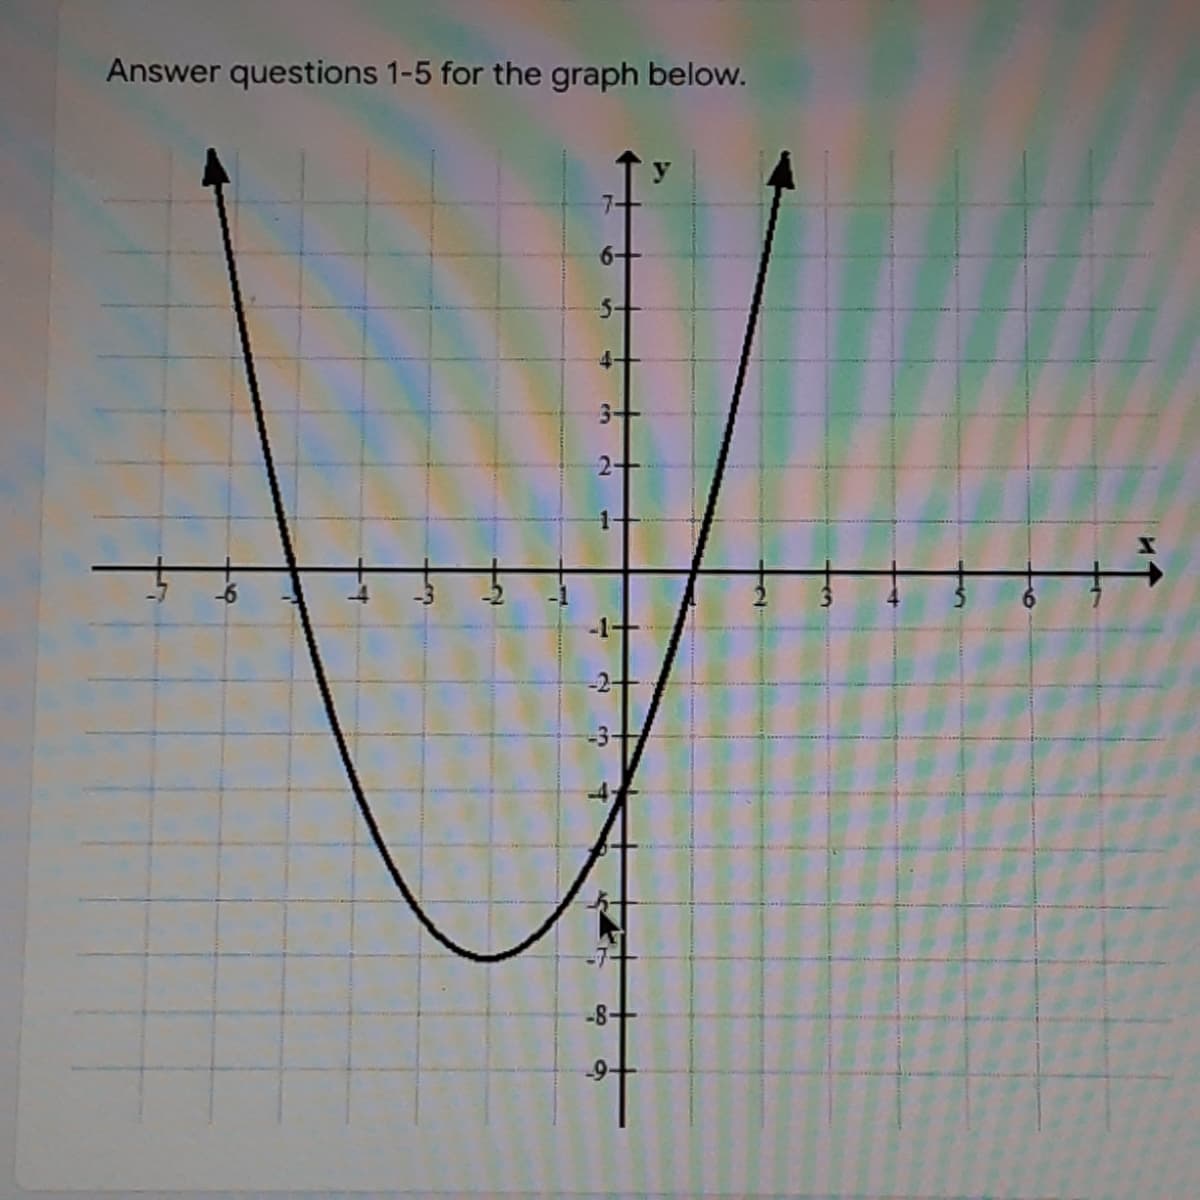 Answer questions 1-5 for the graph below.
5-
4-
3-
-2-
-3-
-8+
-9-
